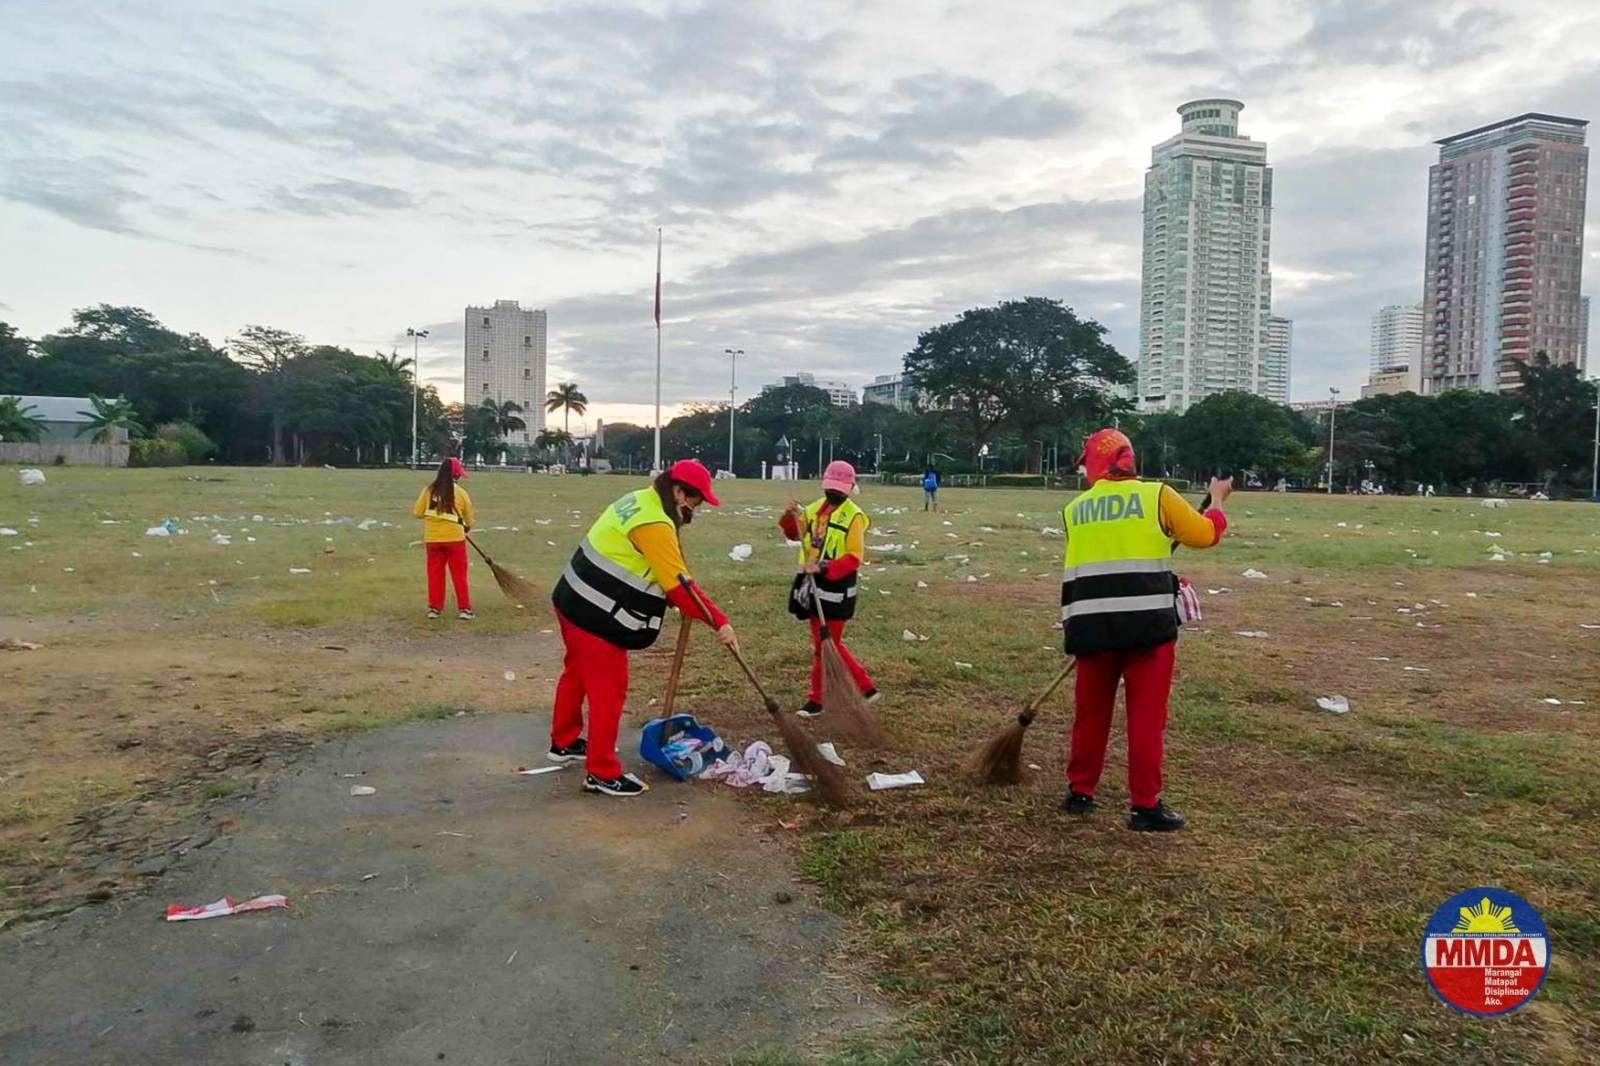 60 bags of trash hauled in Luneta after New Year celebration